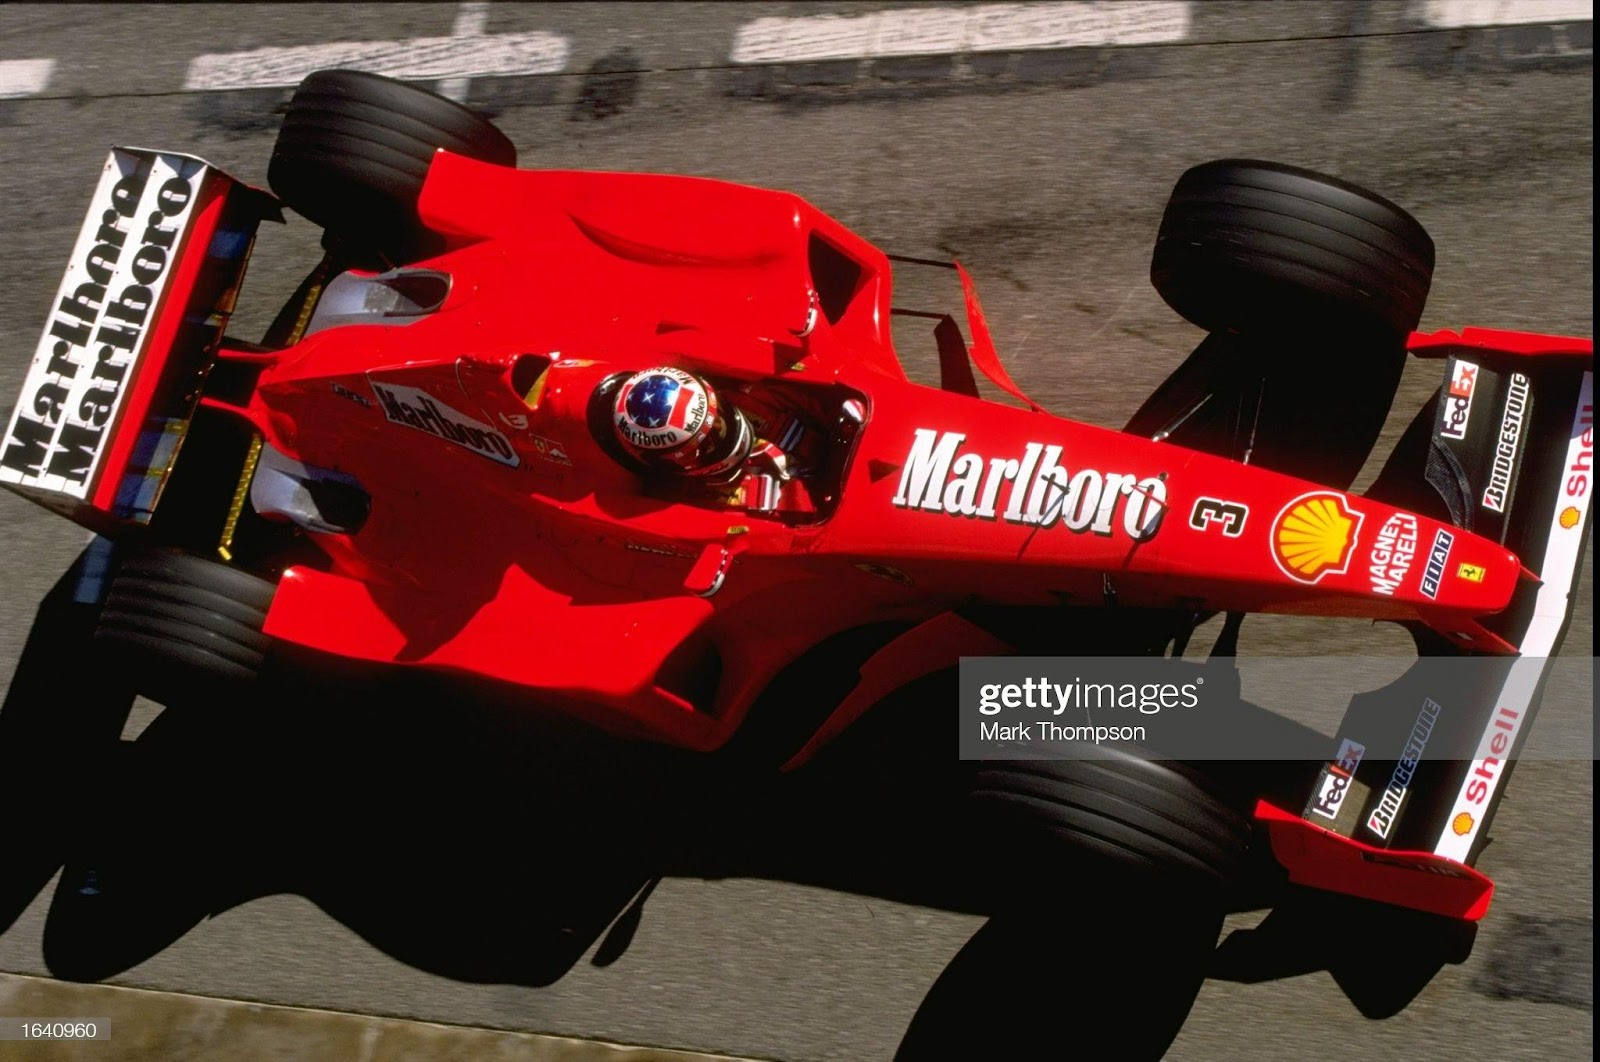 12 Feb 1999: Michael Schumacher races the new Ferrari F399 during a F1 testing session at the Circuit de Catalunya in Barcelona, Spain.